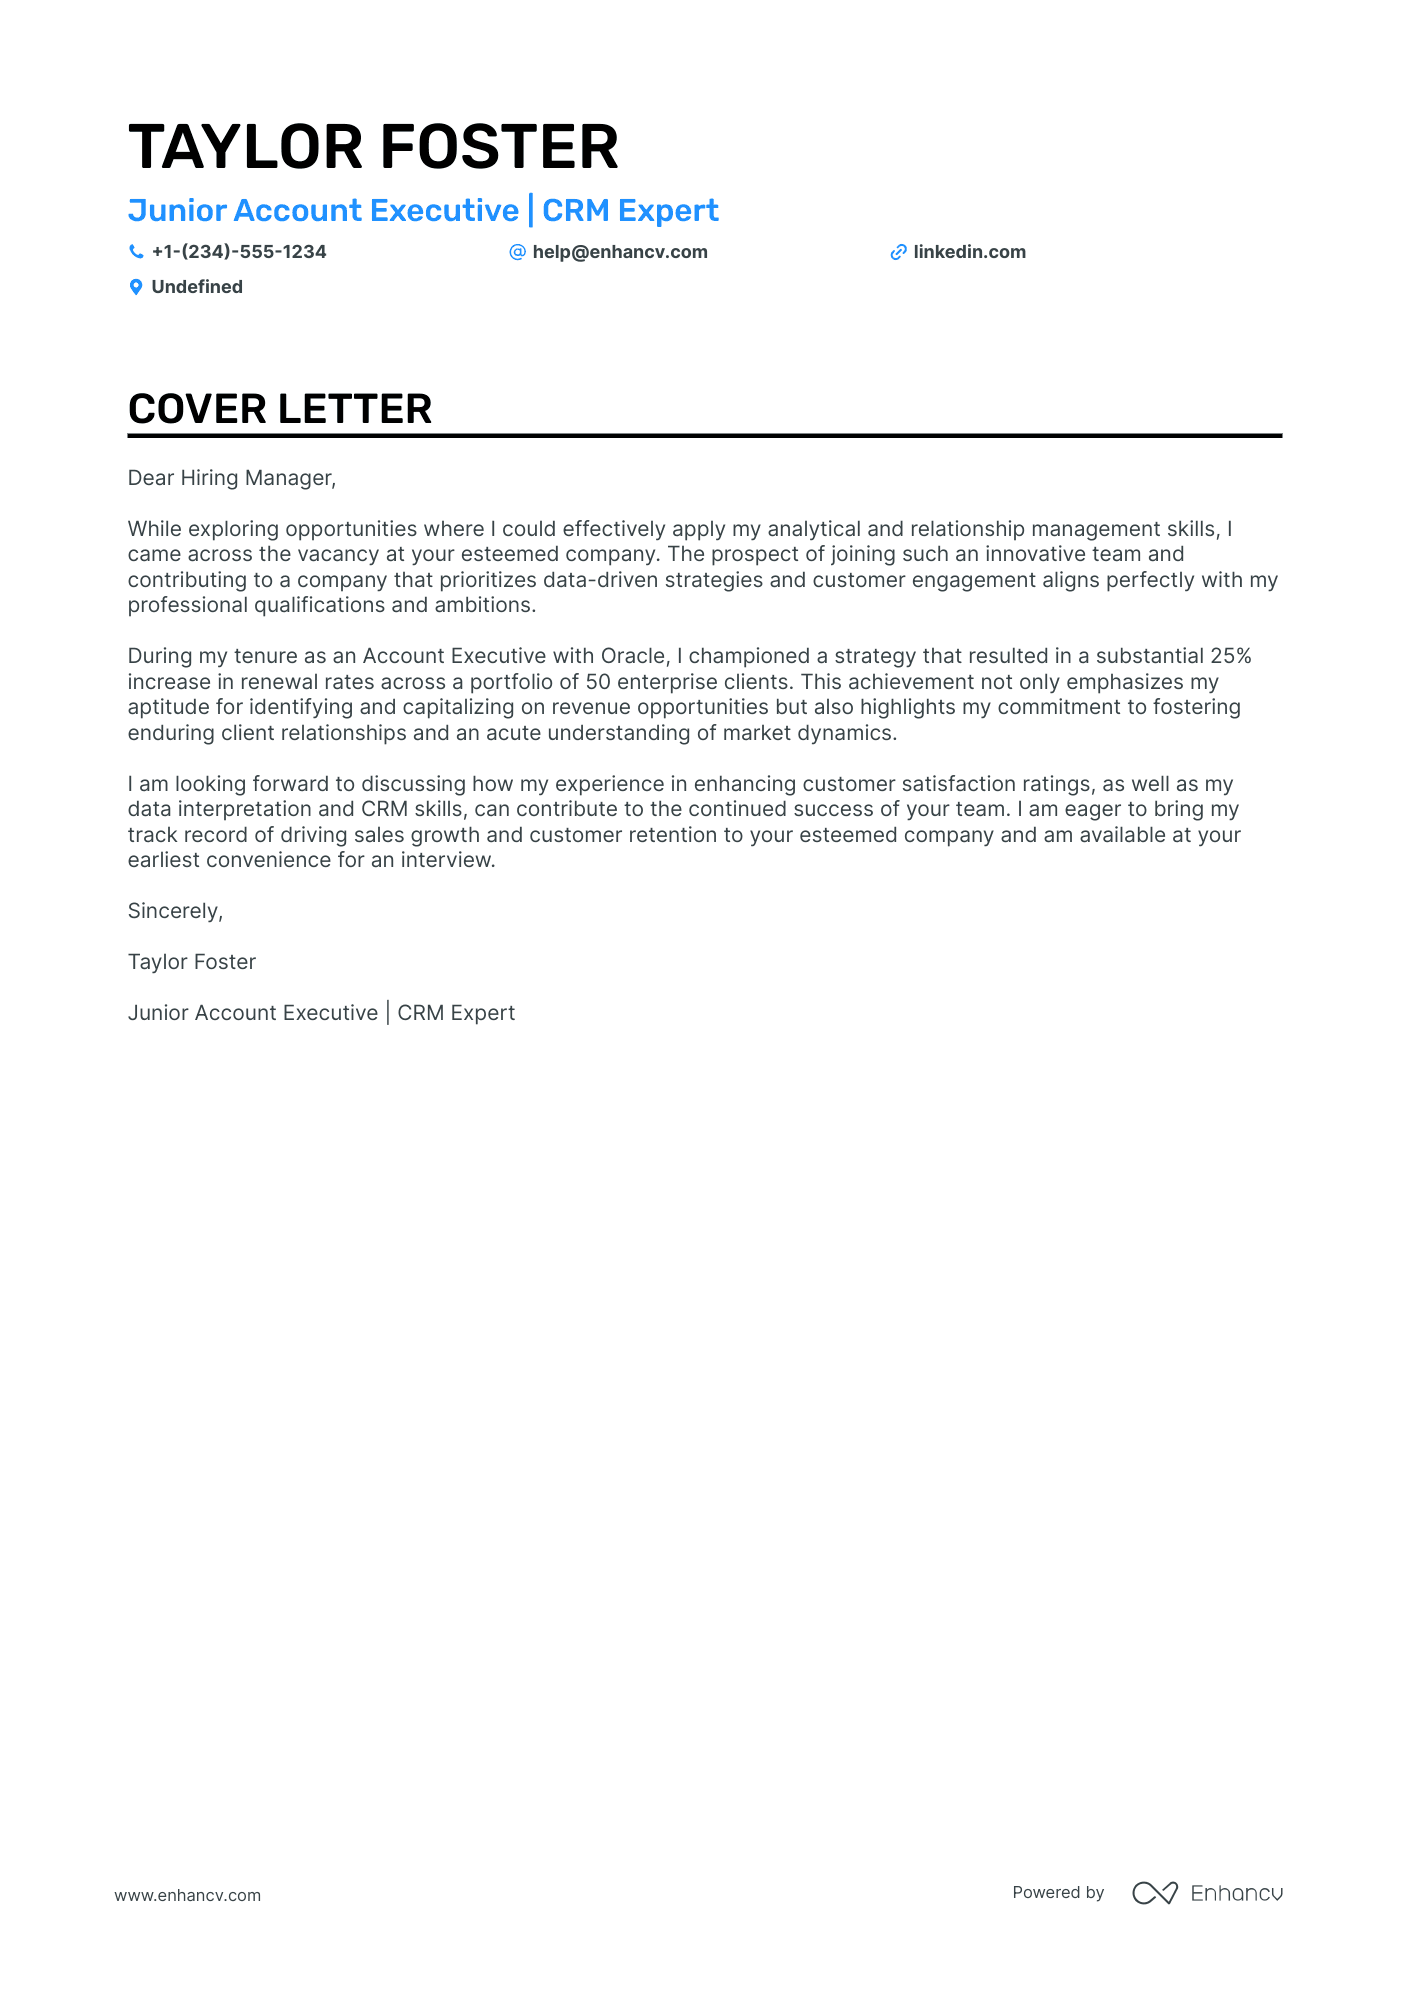 Junior Account Executive cover letter